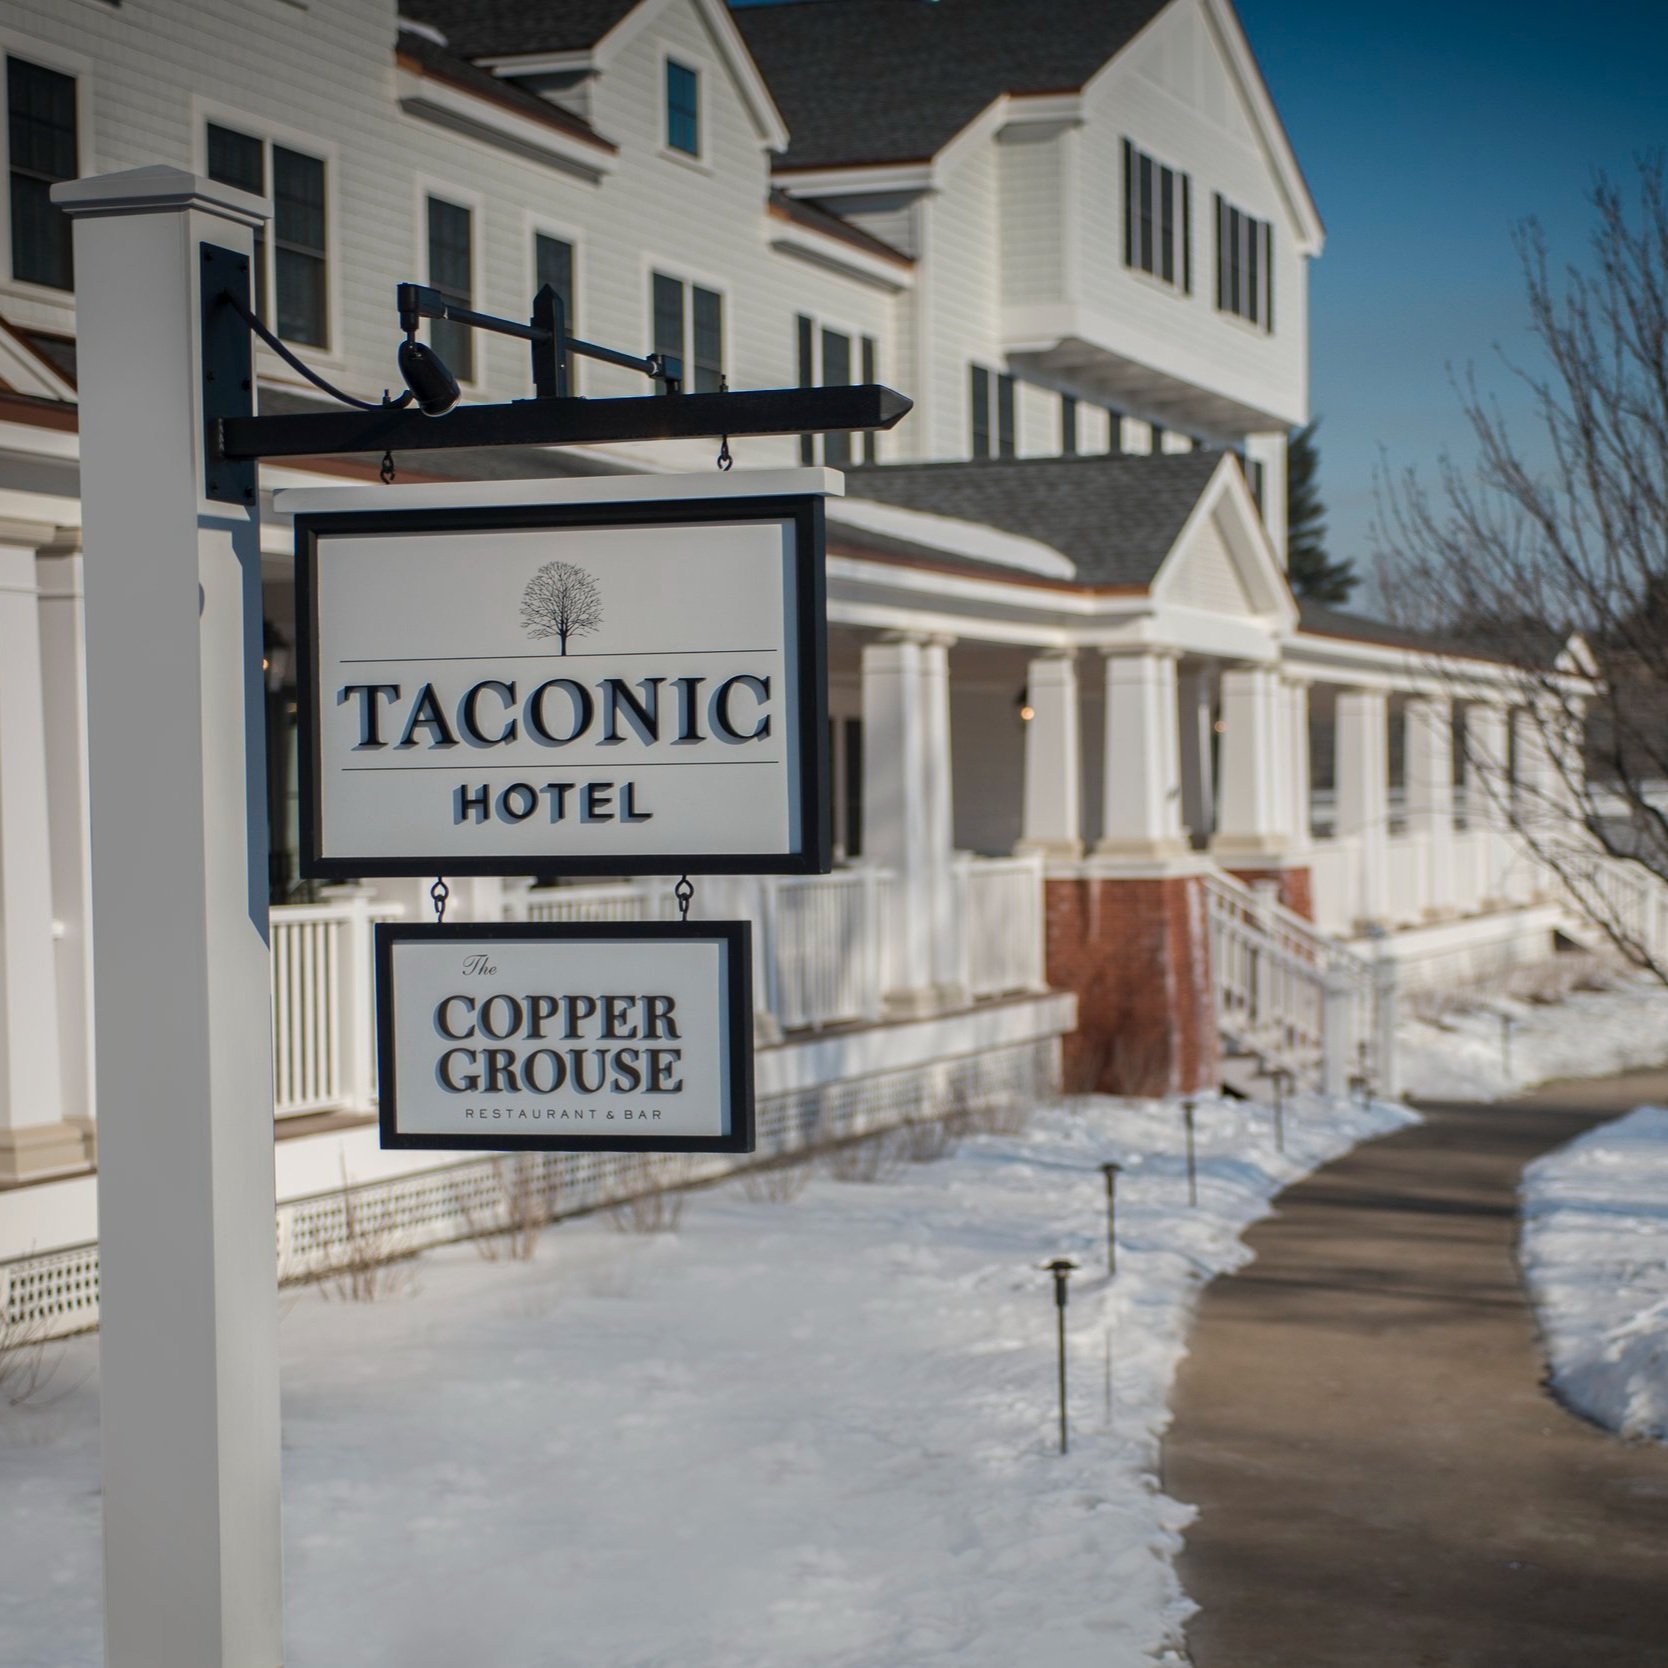 Kimpton Taconic Hotel (12/9 only)